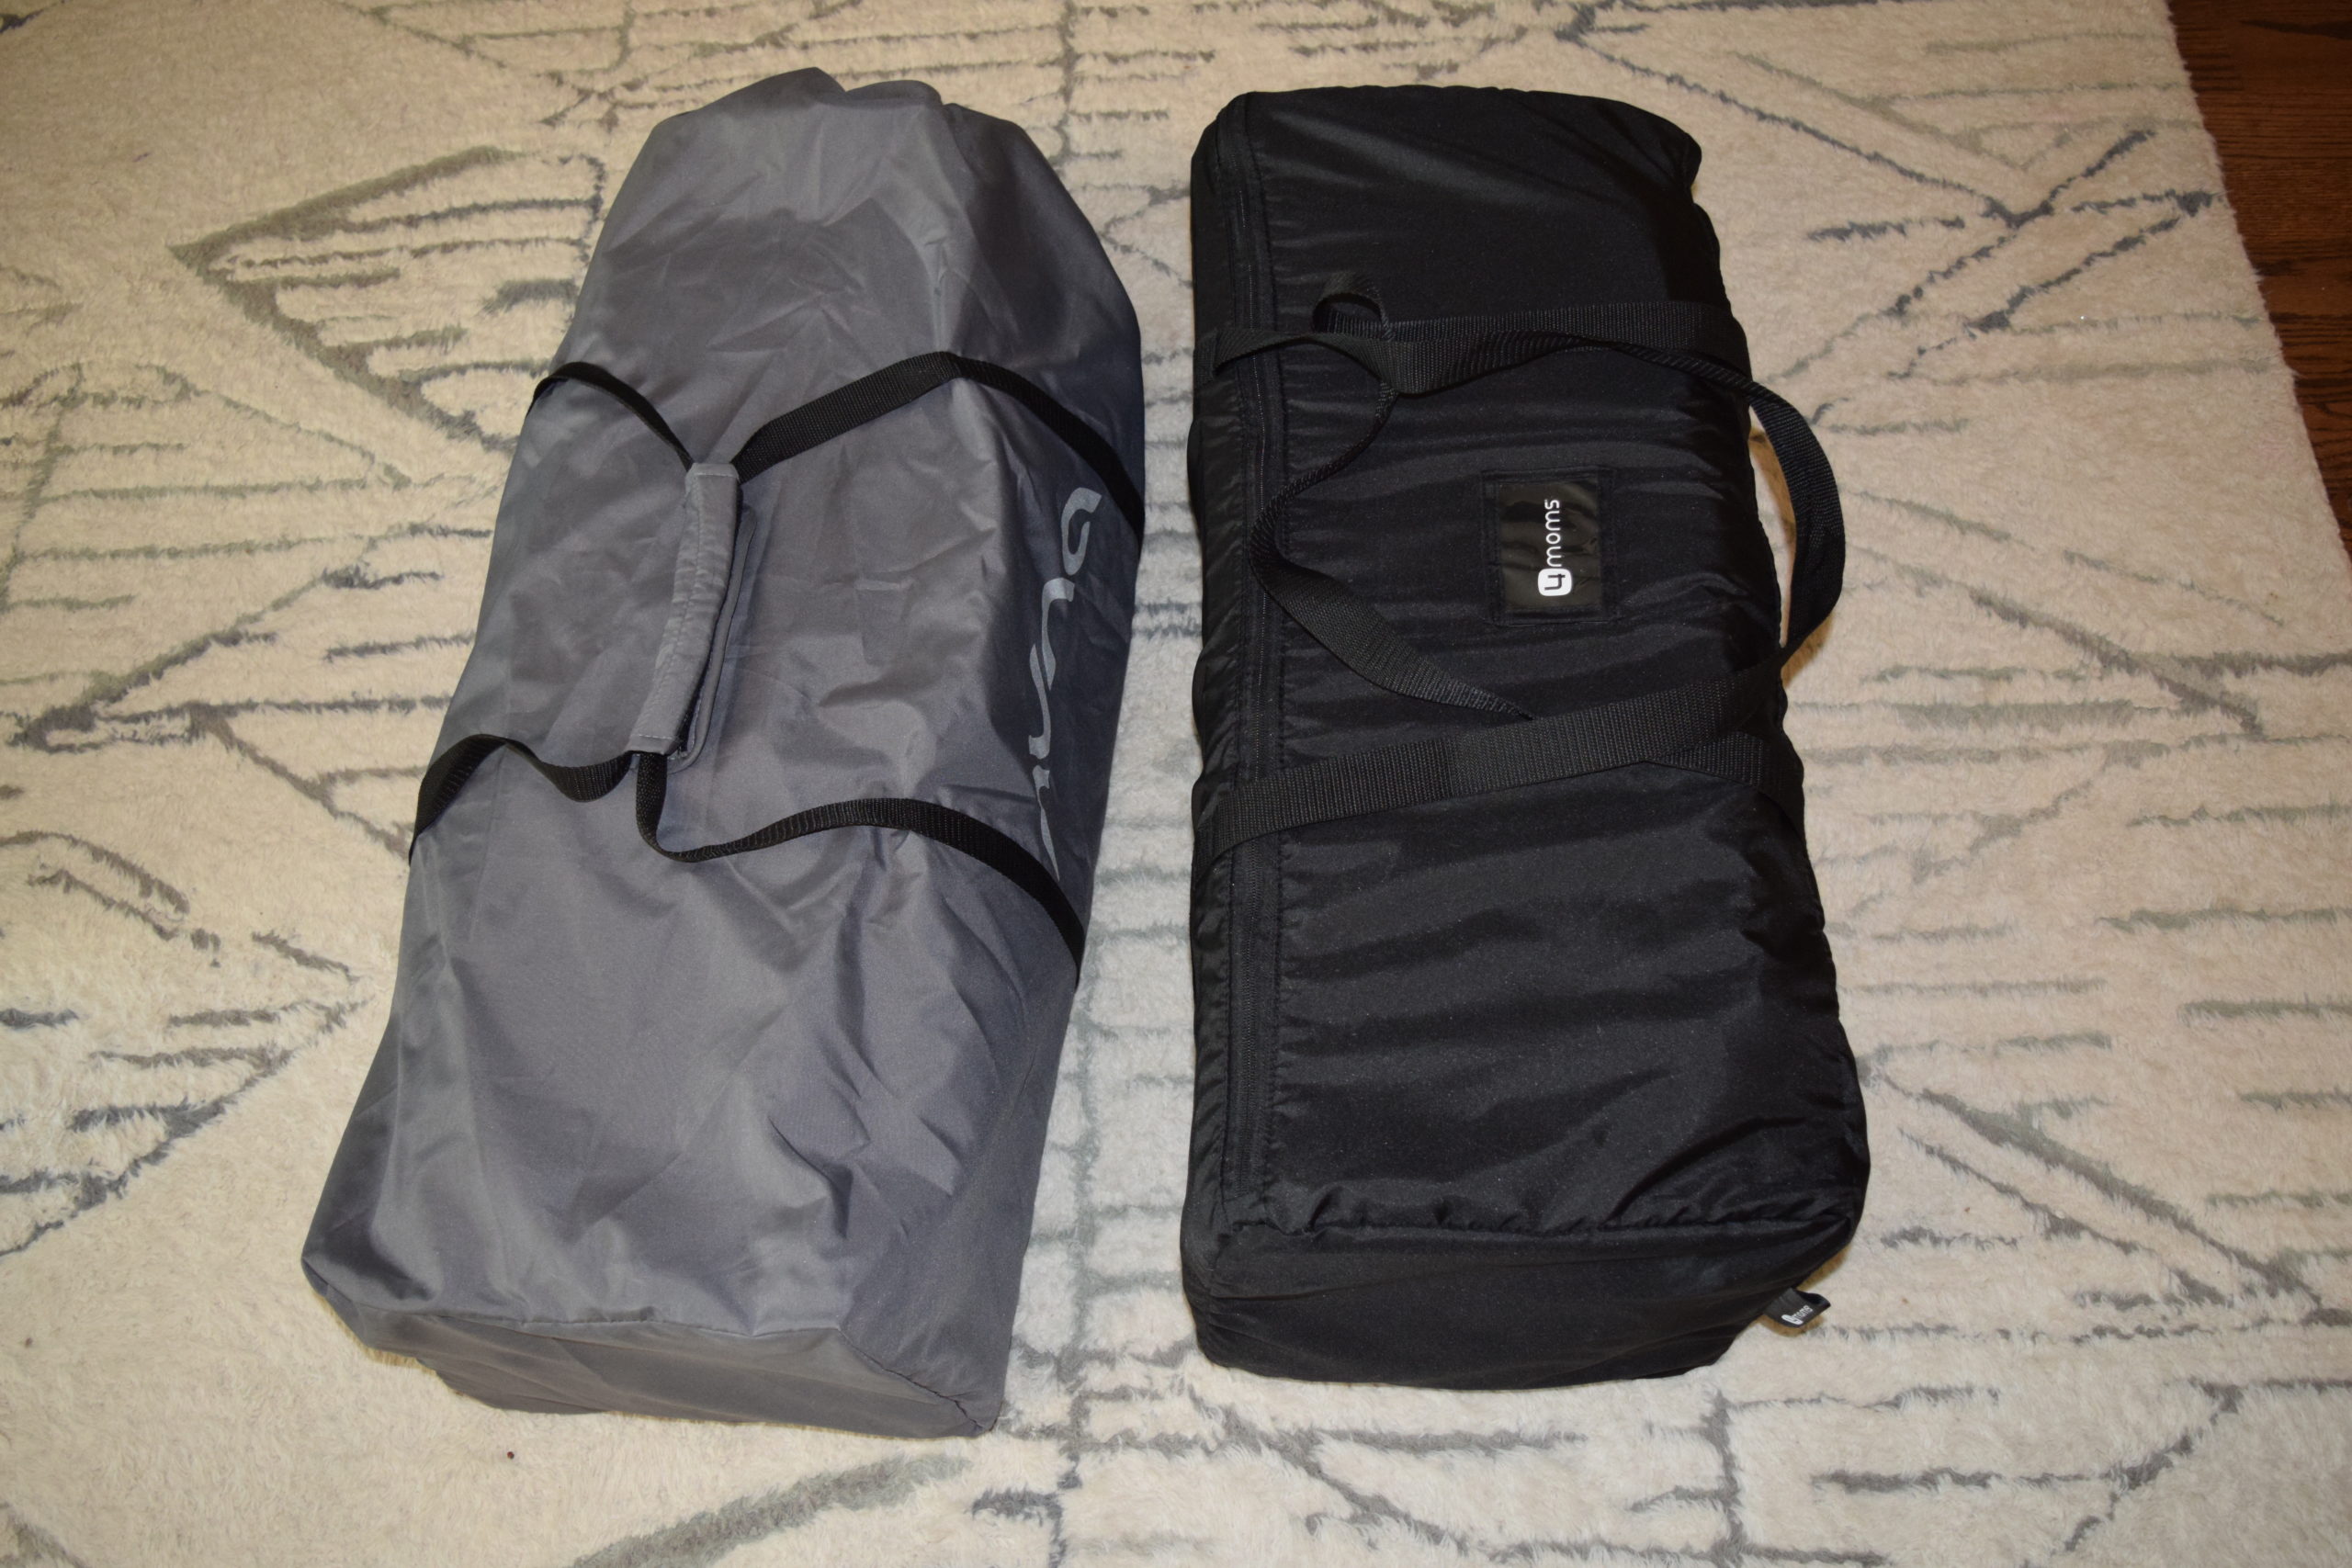 The Nuna Sena and the 4Moms Breeze Plus side by side on a carpet in their travel bags